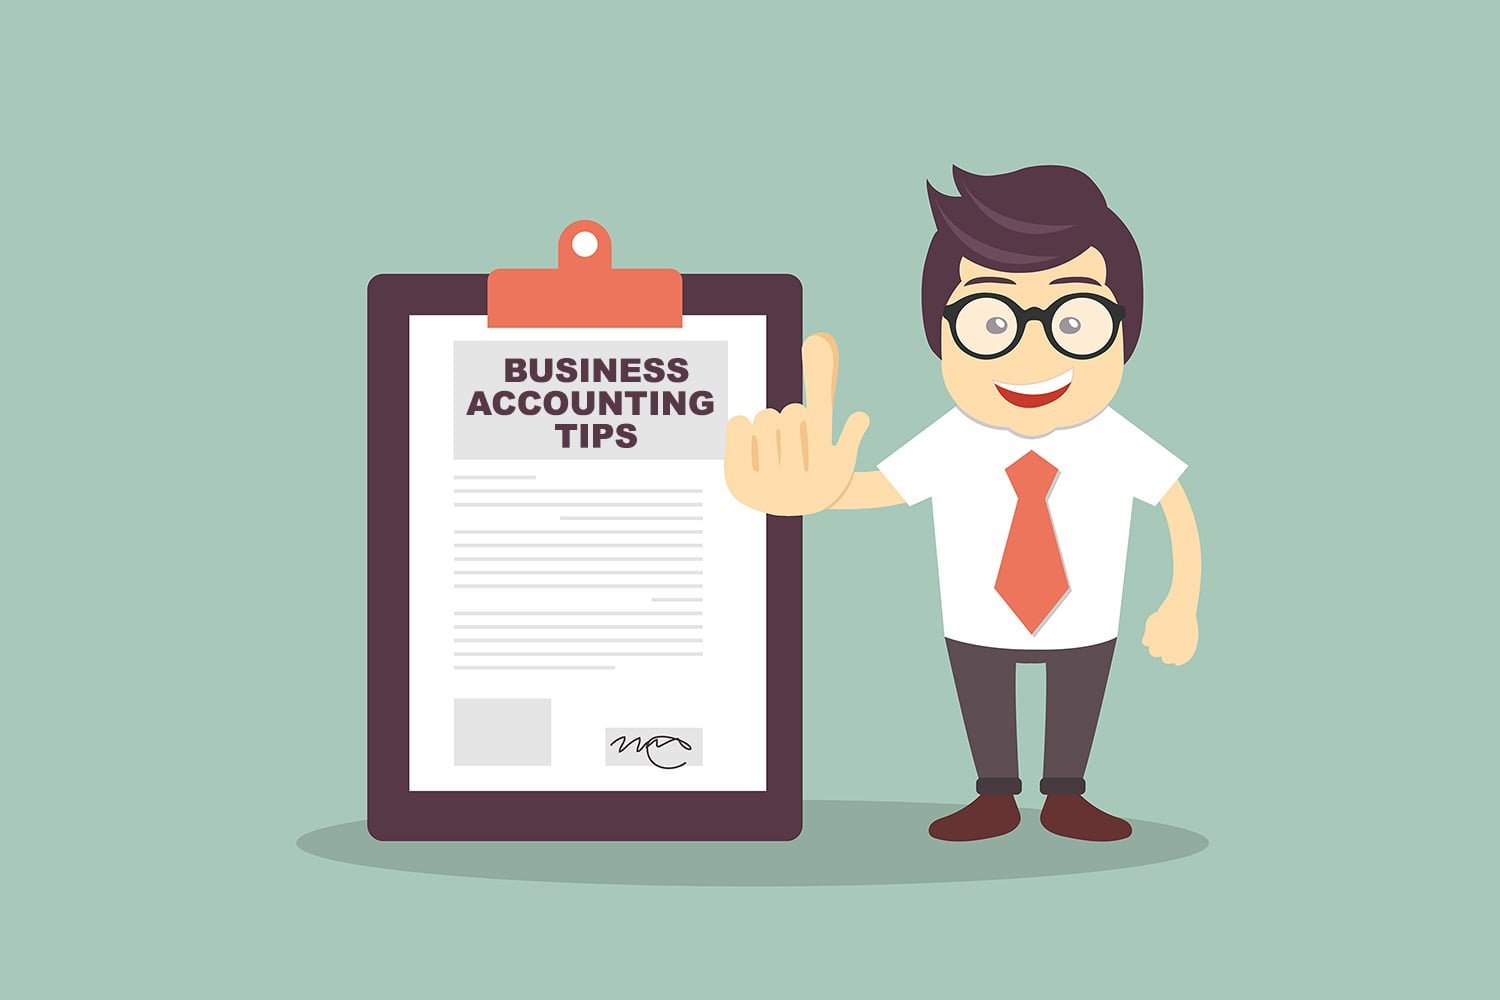 Business Accounting Tips for successful Small Business to Mid-size businesses